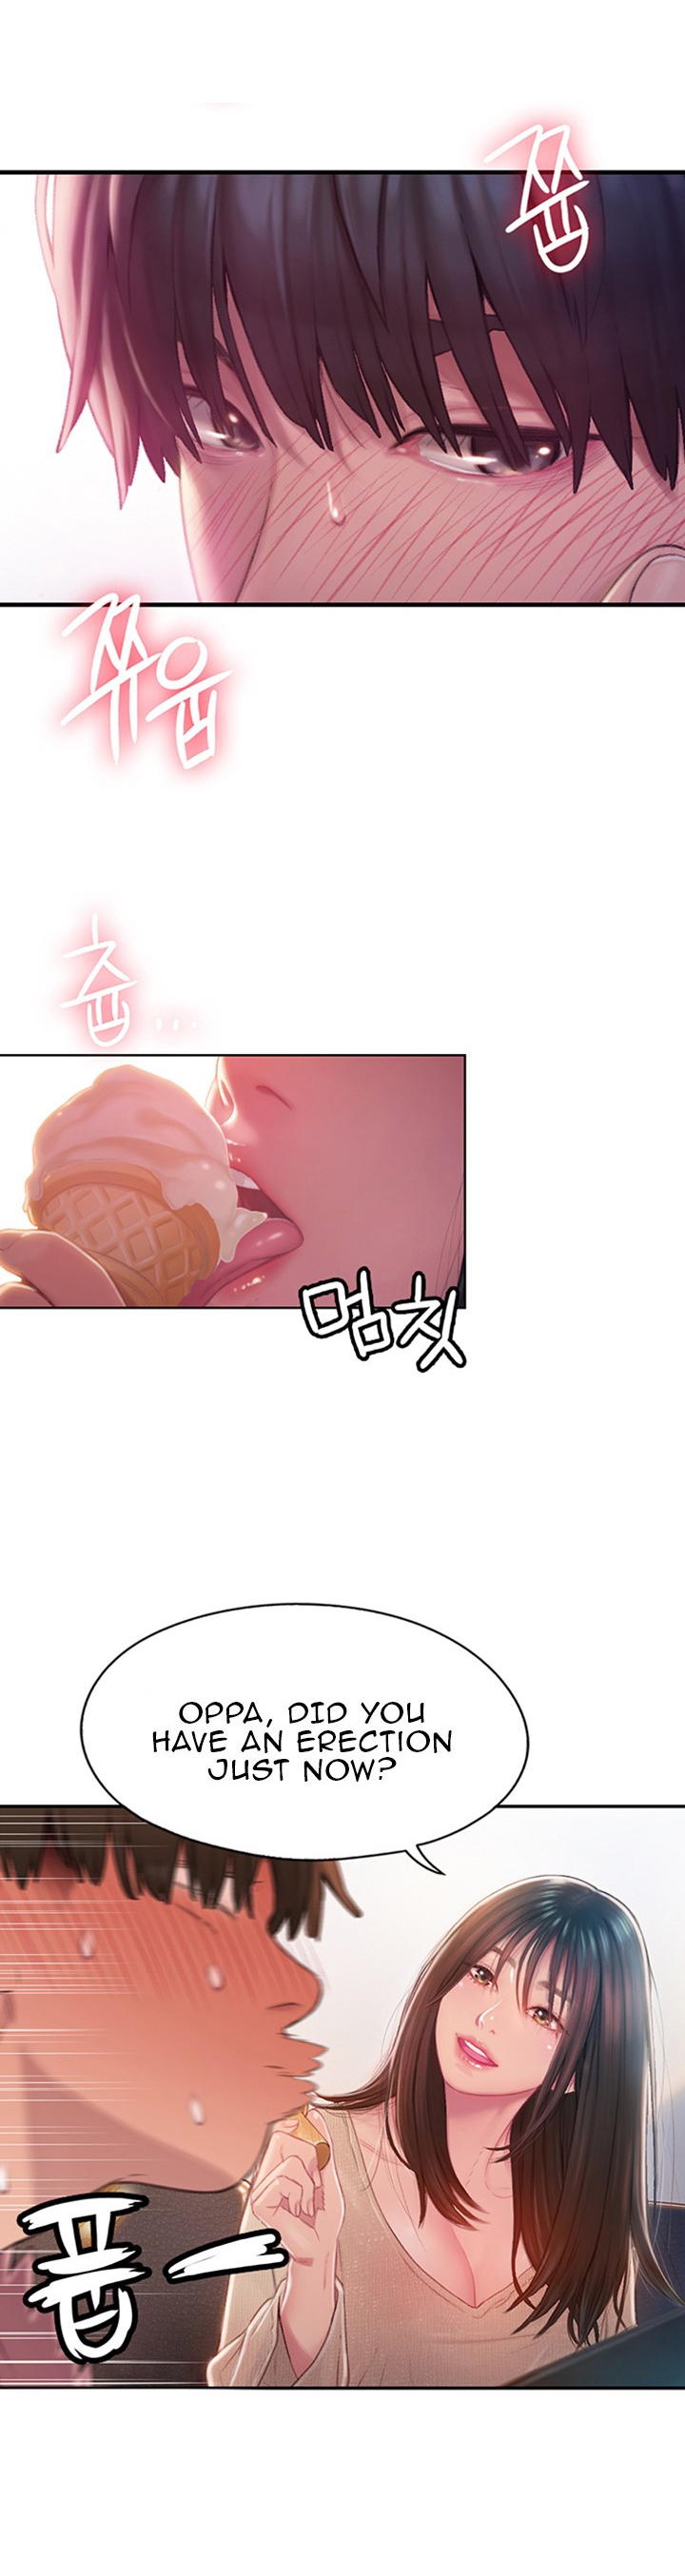 [Park Hyeongjun] Love Limit Exceeded (01-21) Ongoing - Page 4